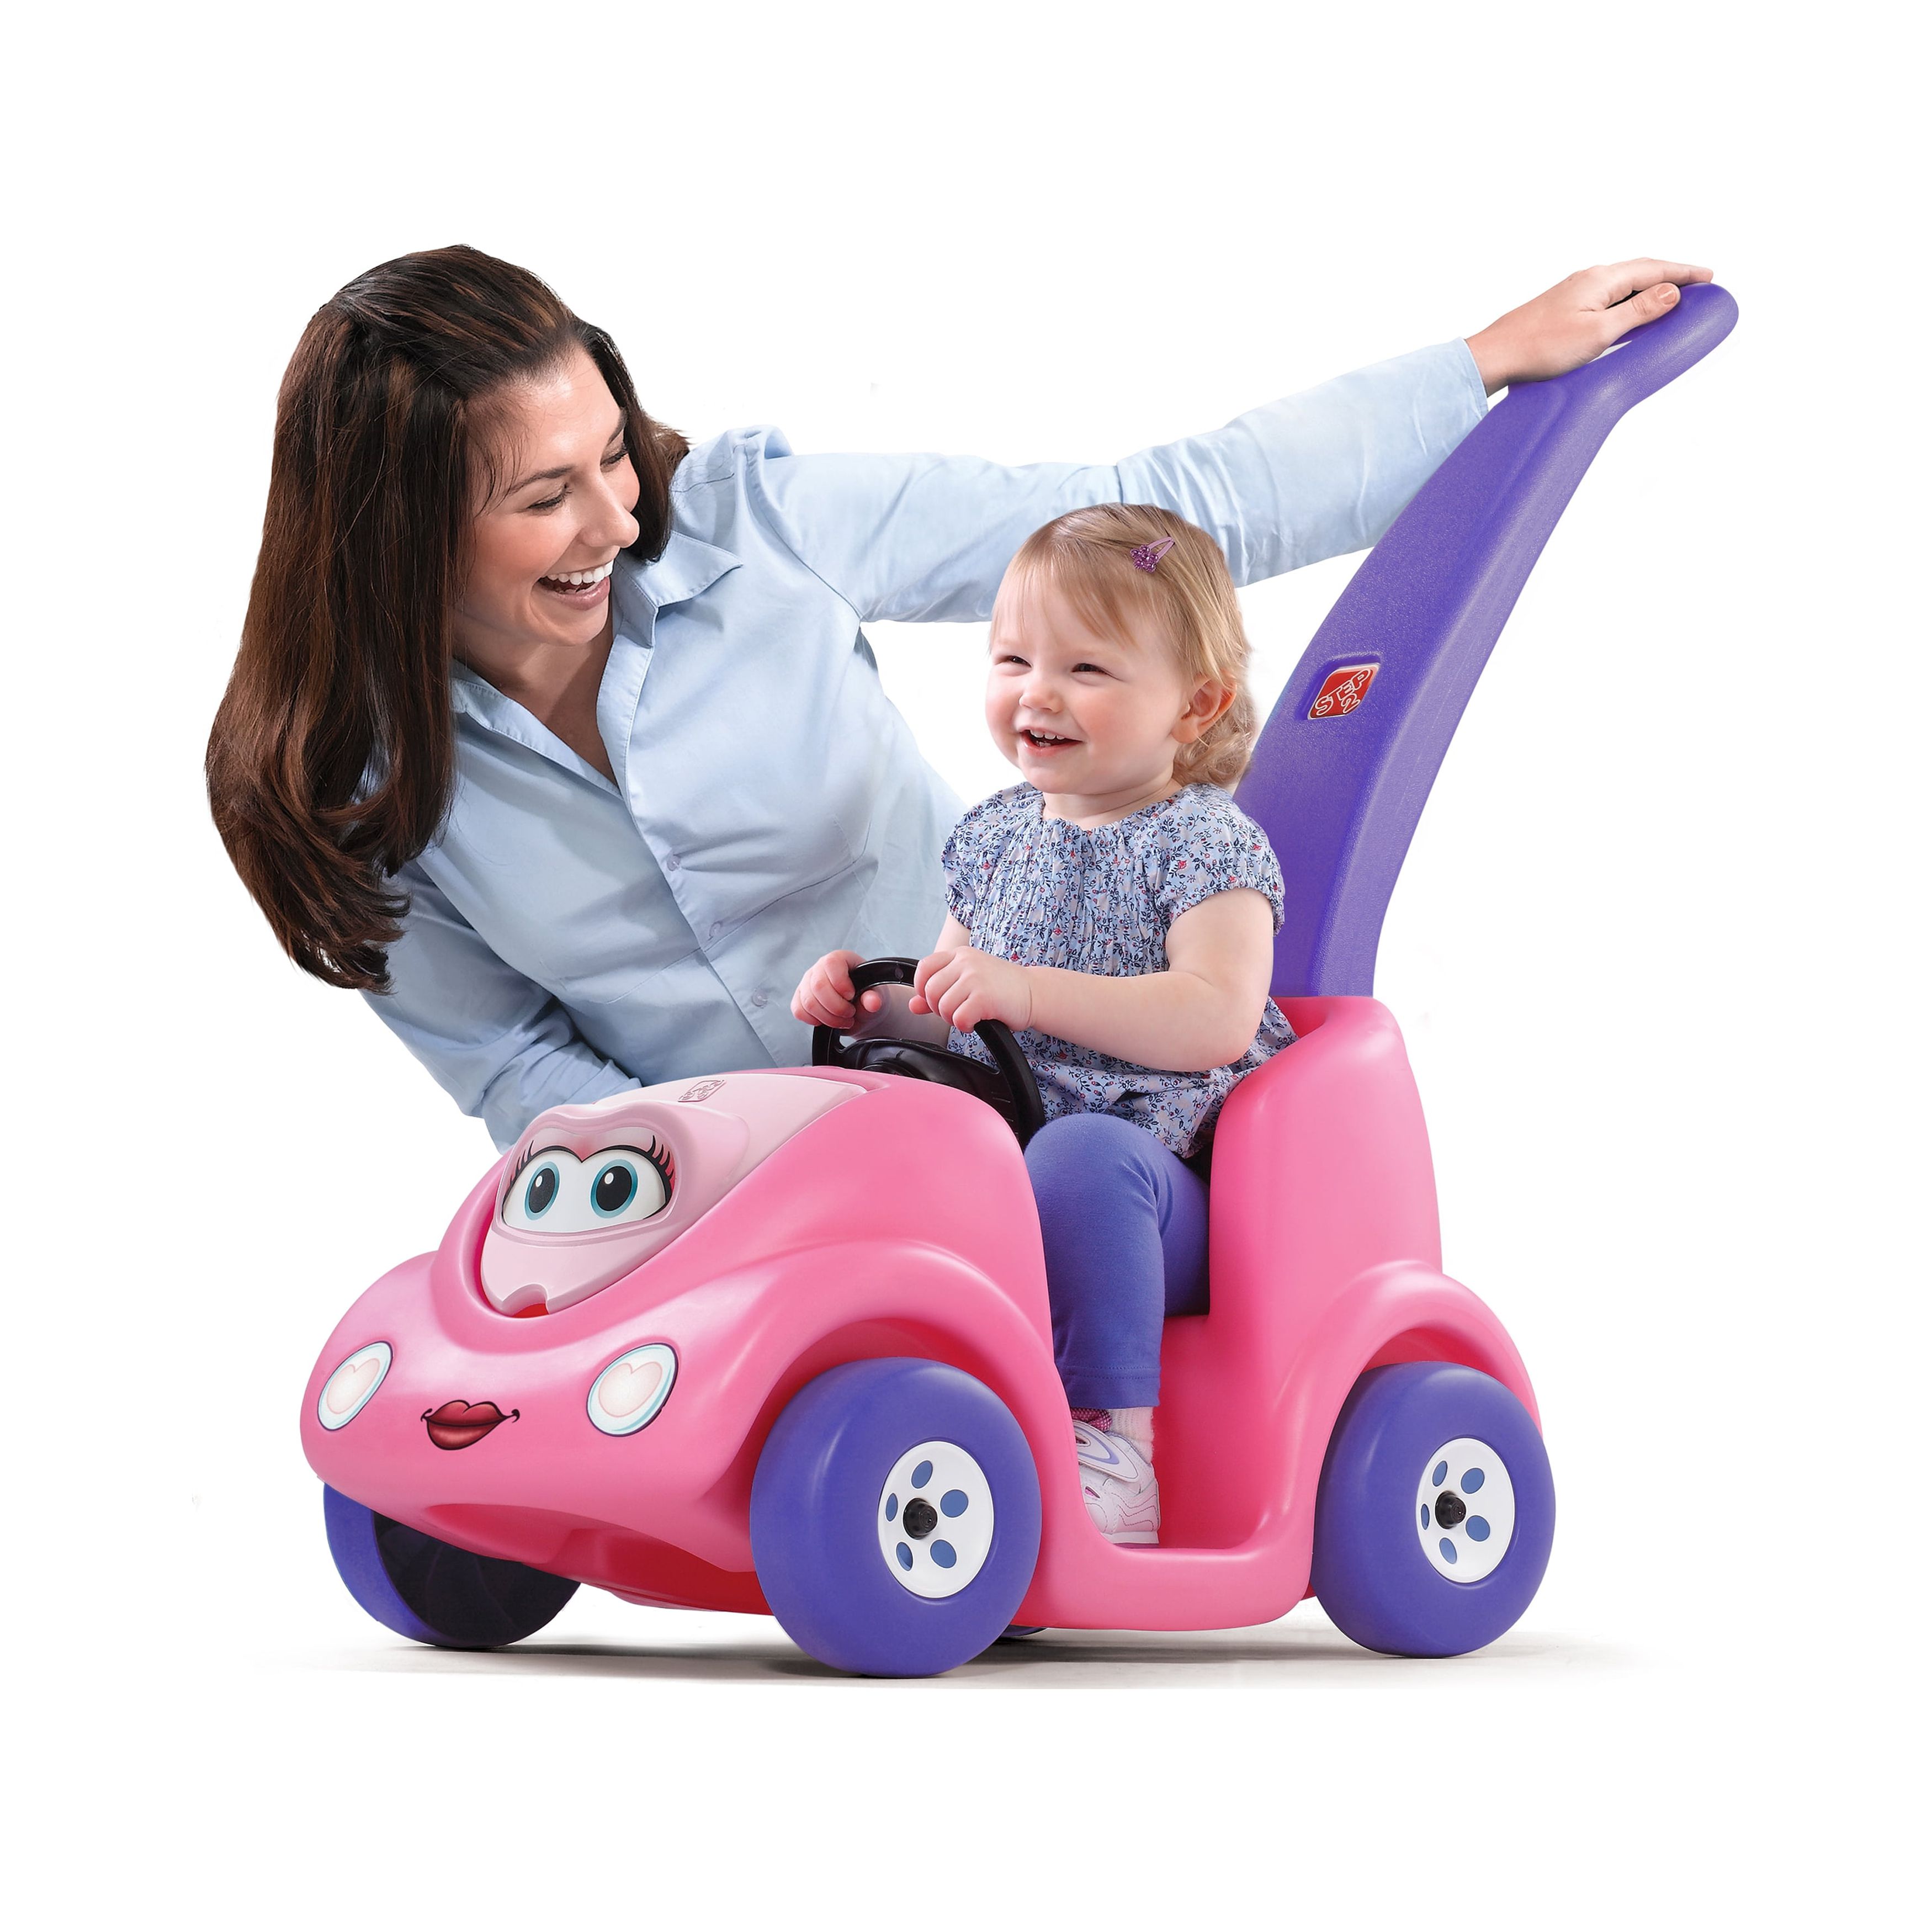 Step2 Push Around Buggy Pink 10th Anniversary Edition Kids Push Car and Ride On Toy for Toddler - image 3 of 9